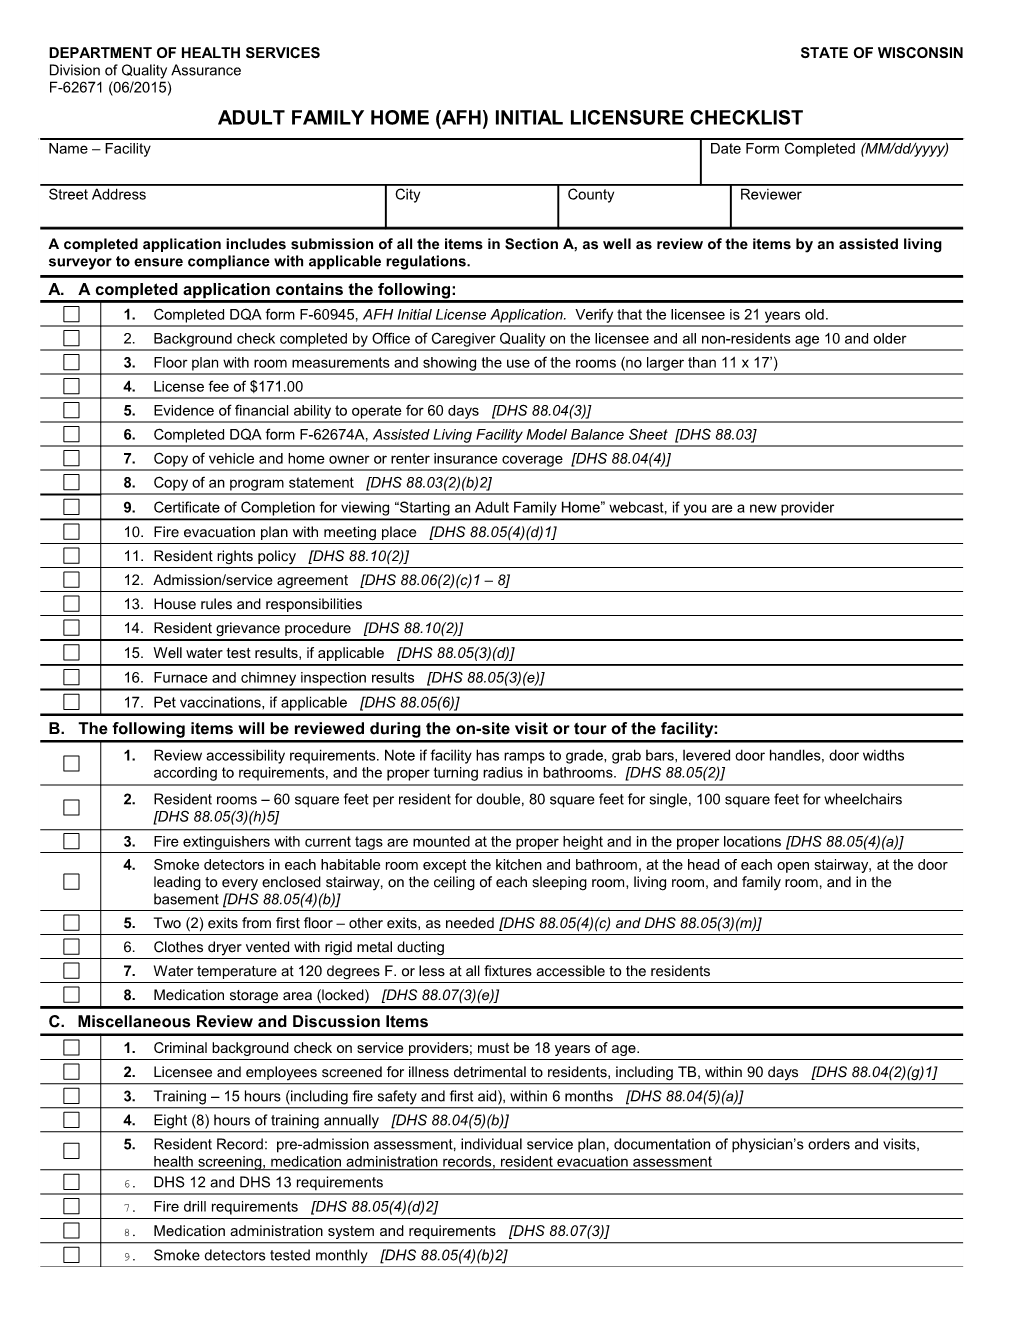 Adult Family Home Initial Licensure Checklist, F-62671